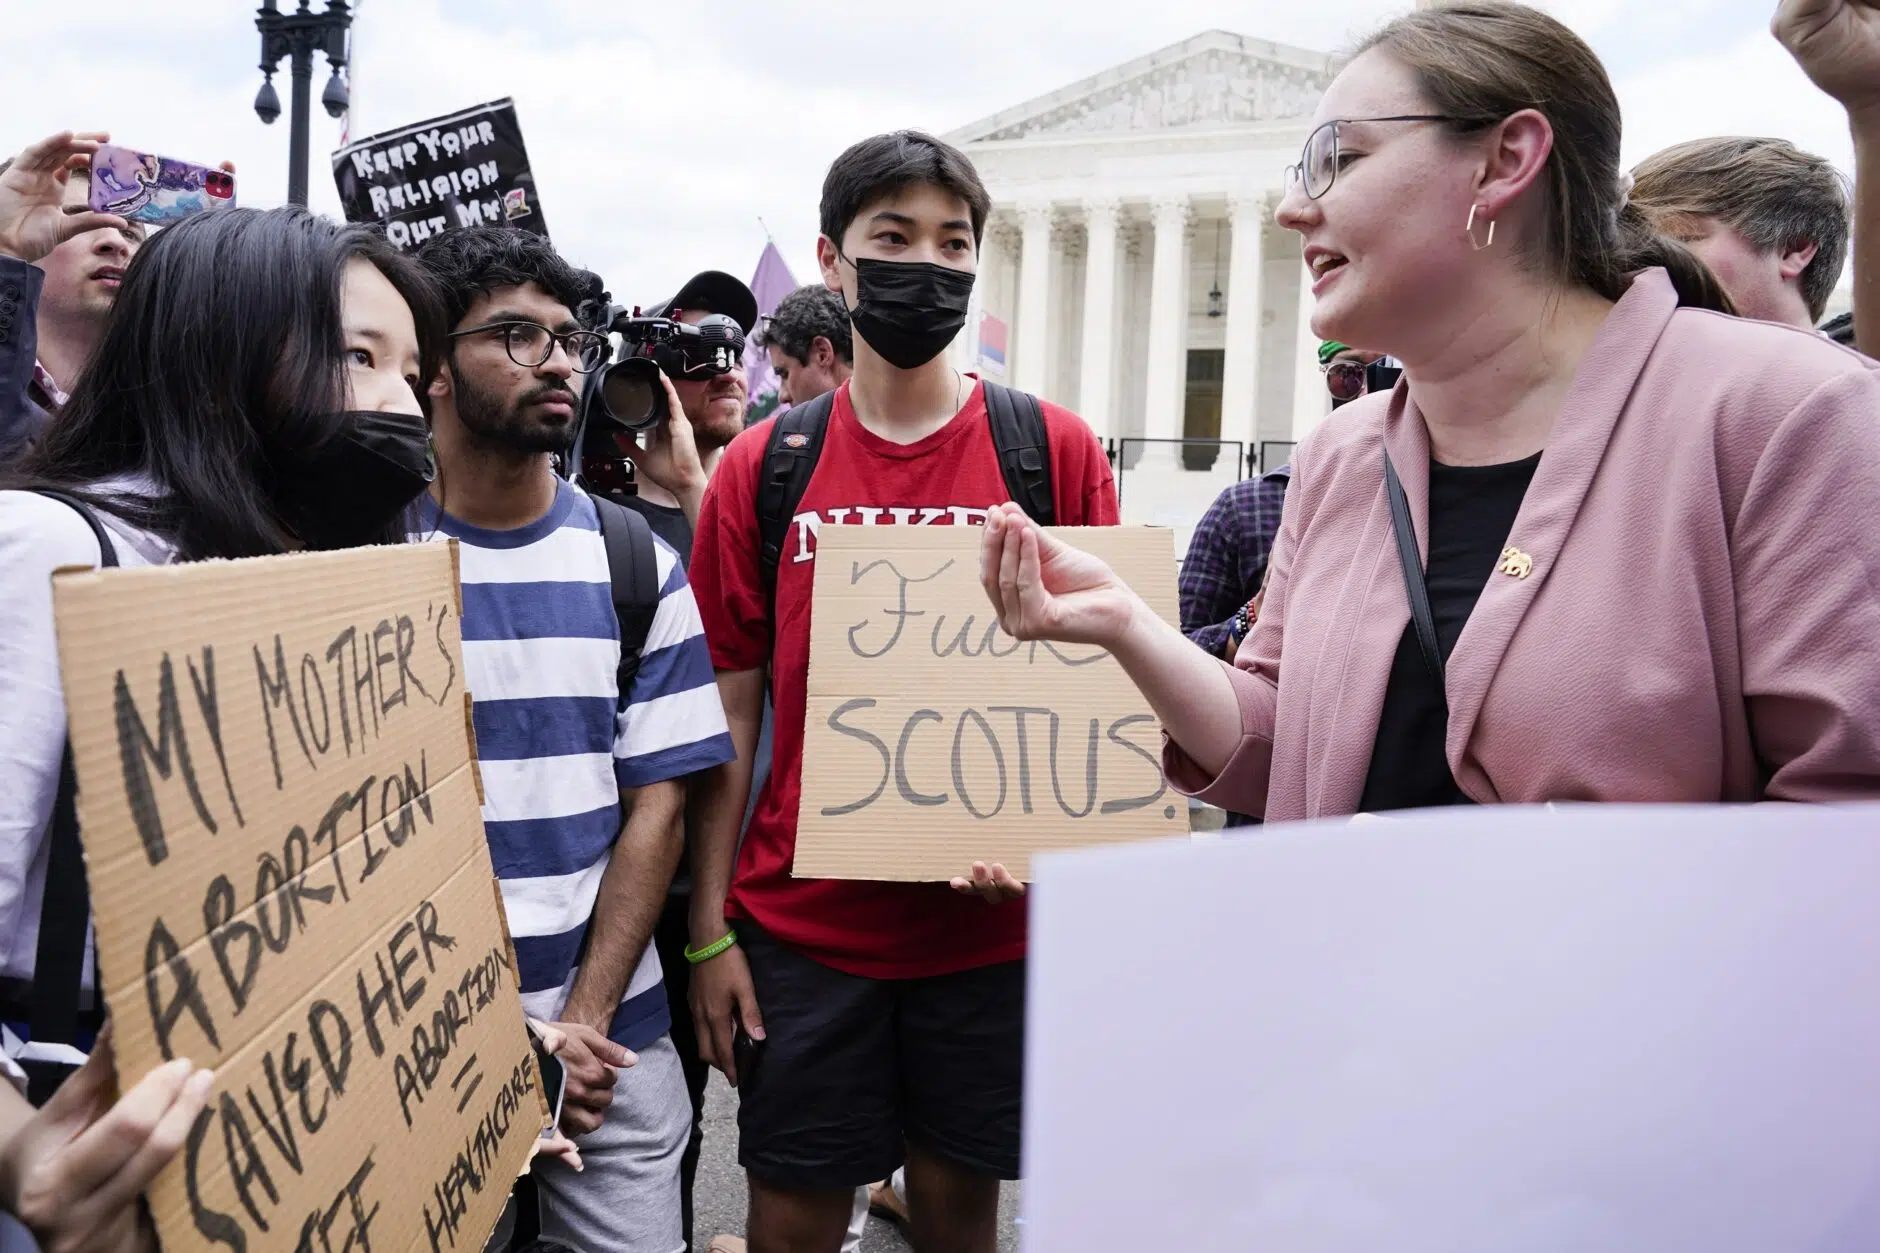 Abortion-rights activists, at left, confront anti-abortion activists, at right, following the Supreme Court's decision to overturn Roe v. Wade on Friday, June 24, 2022.